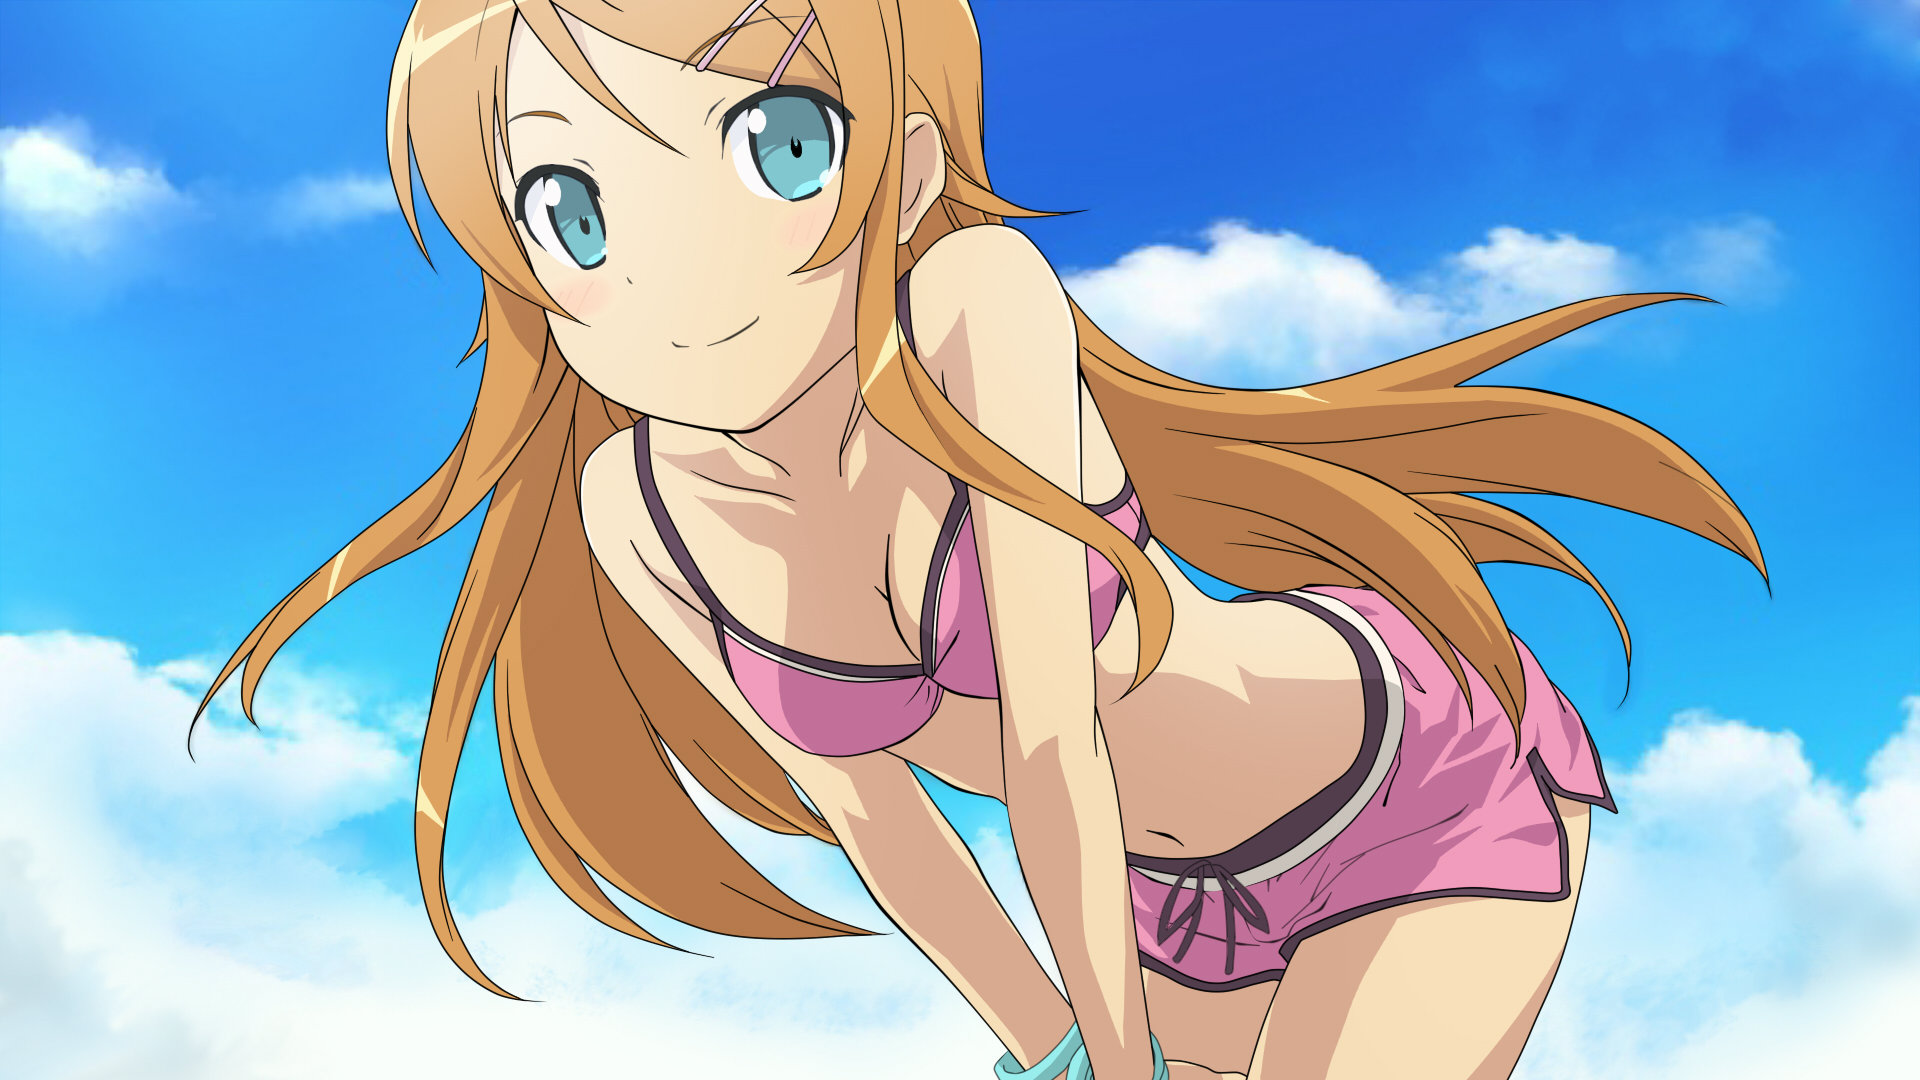 Download hd 1920x1080 Oreimo computer wallpaper ID:9085 for free